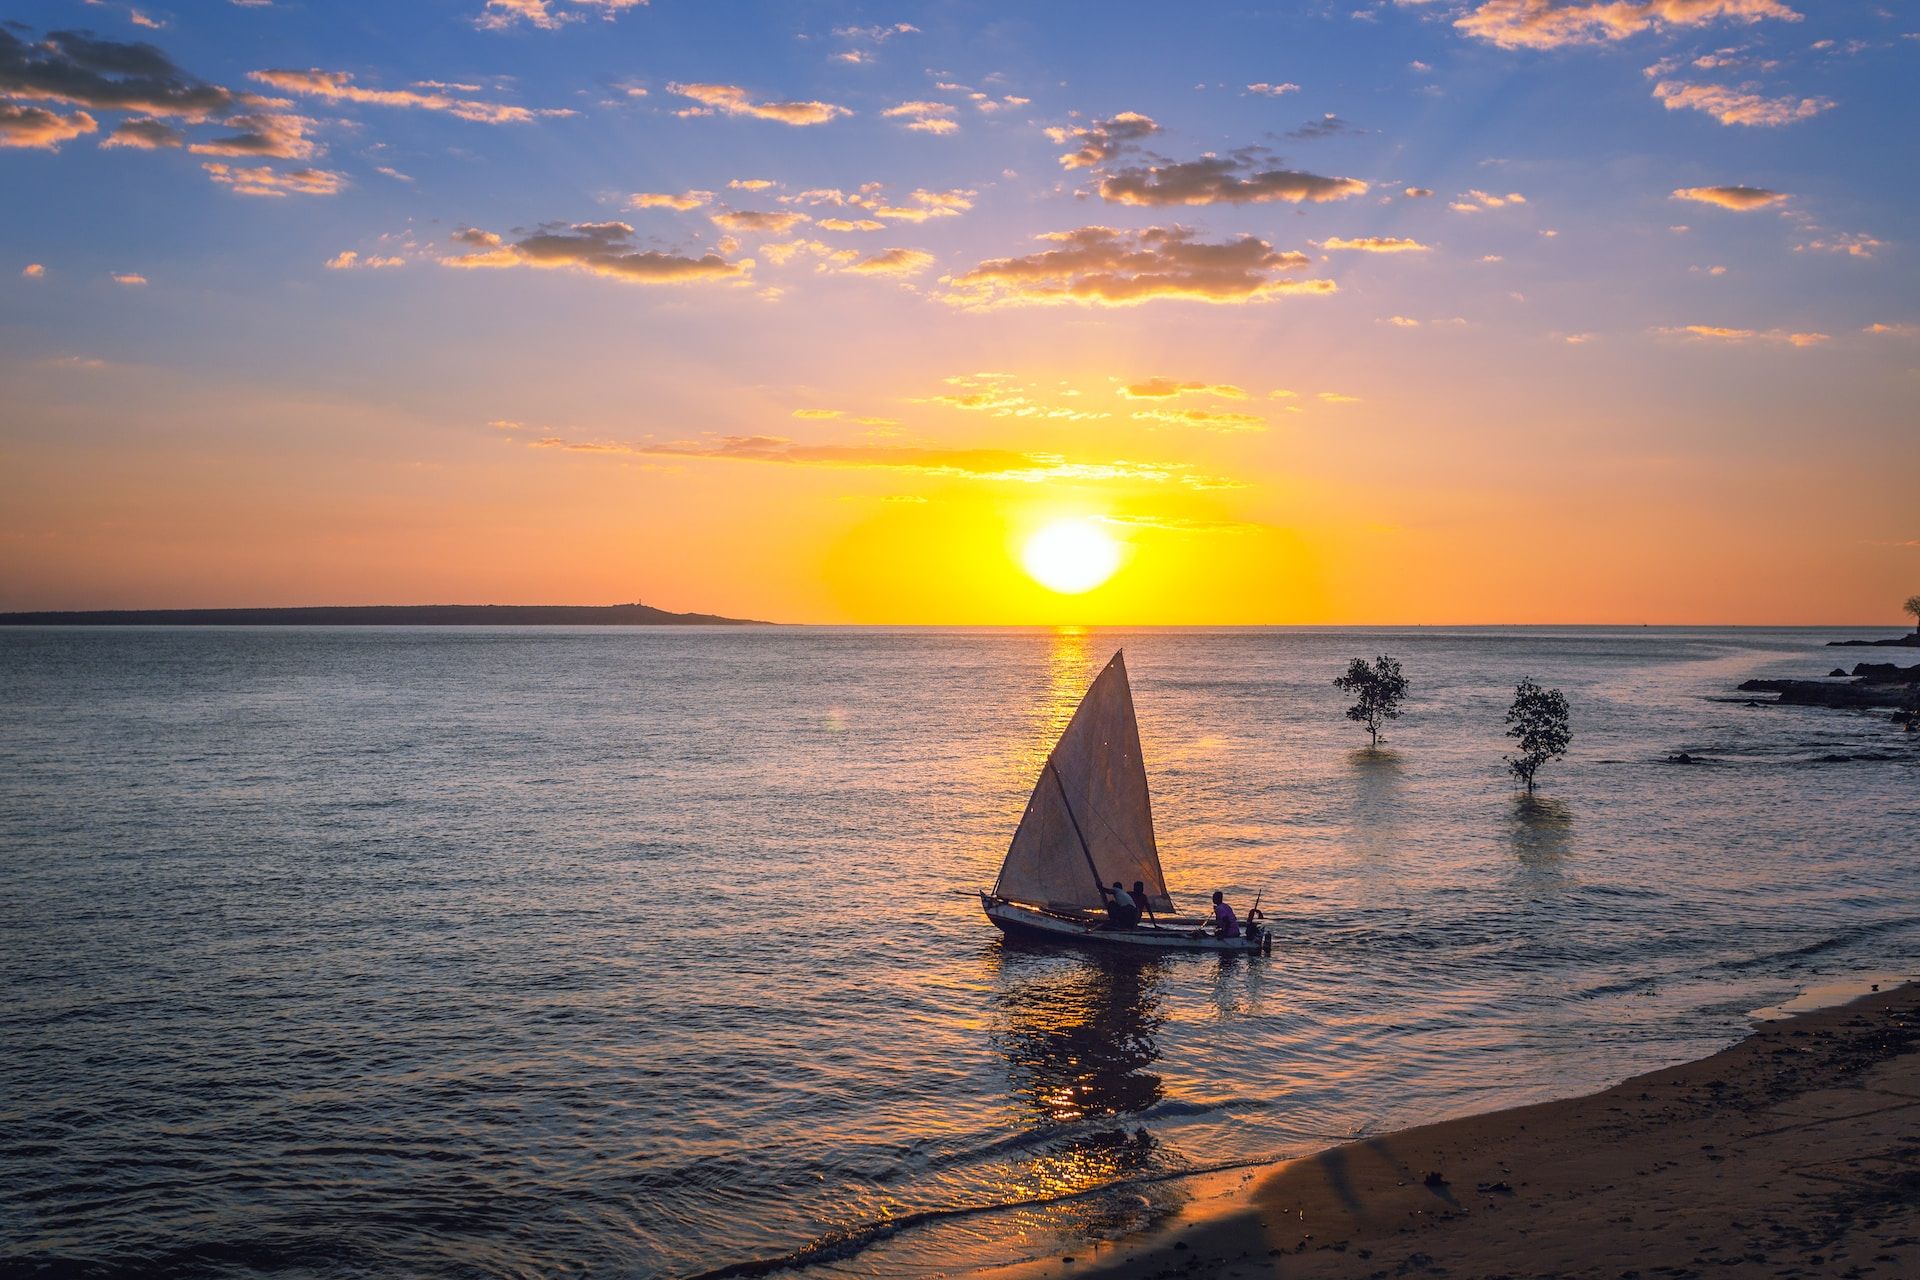 A yatch on the water at sunset in Madagascar